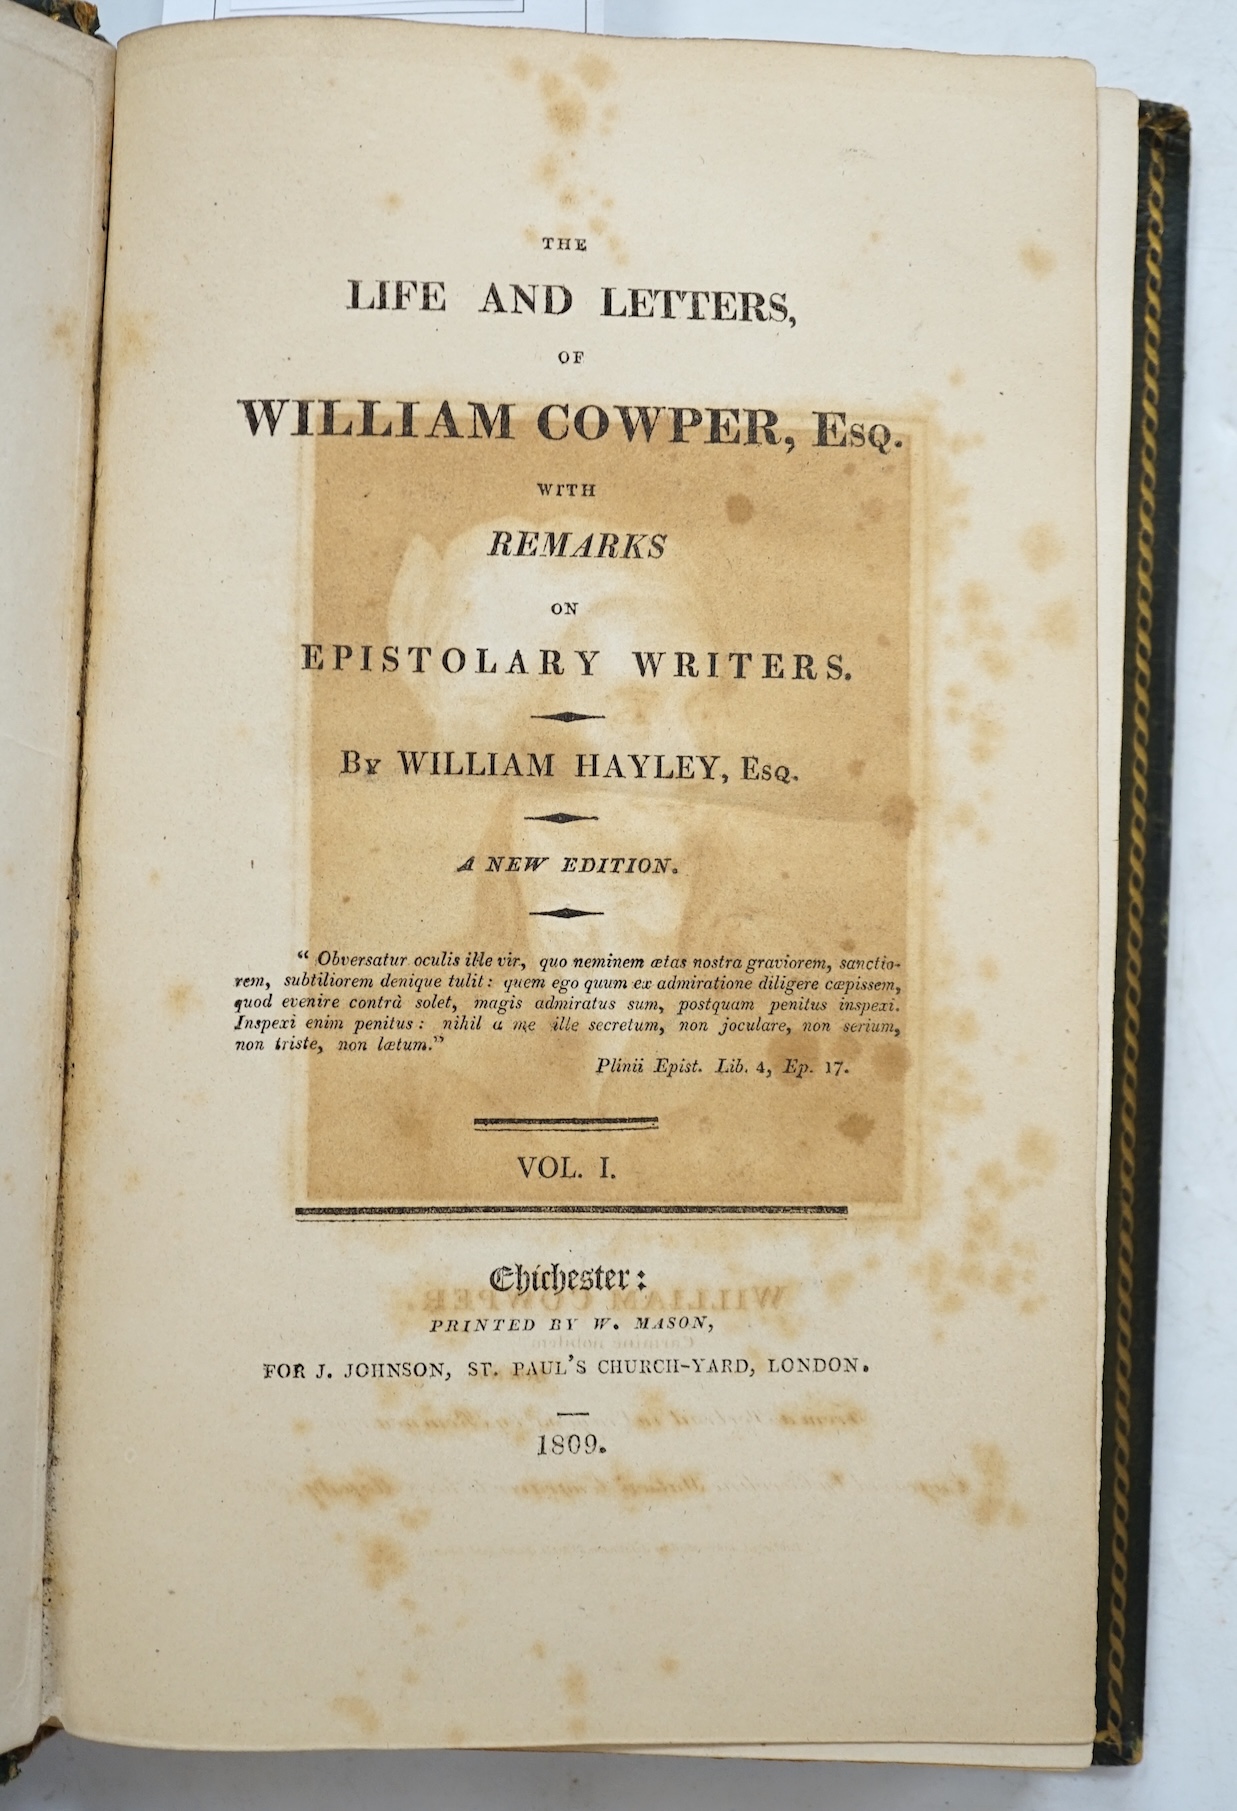 Hayley, William - The Life and Letters of William Cowper, Esq. With remarks on epistolary writers. new edition, 4vols. portrait frontis.; earlier 19th cent. gilt ruled and blind decorated green straight grain morocco, sp